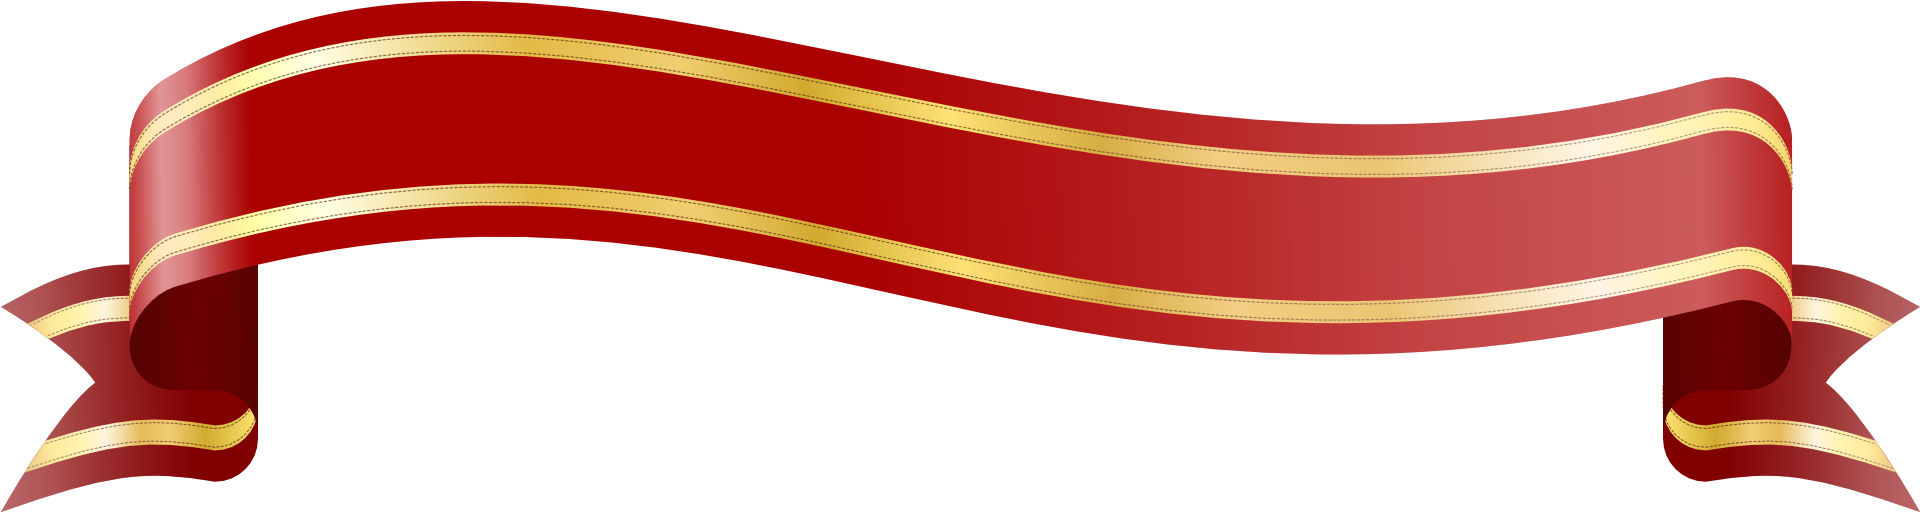 Ribbon Banner For Christmas - Banner Design In Png (2400x667)